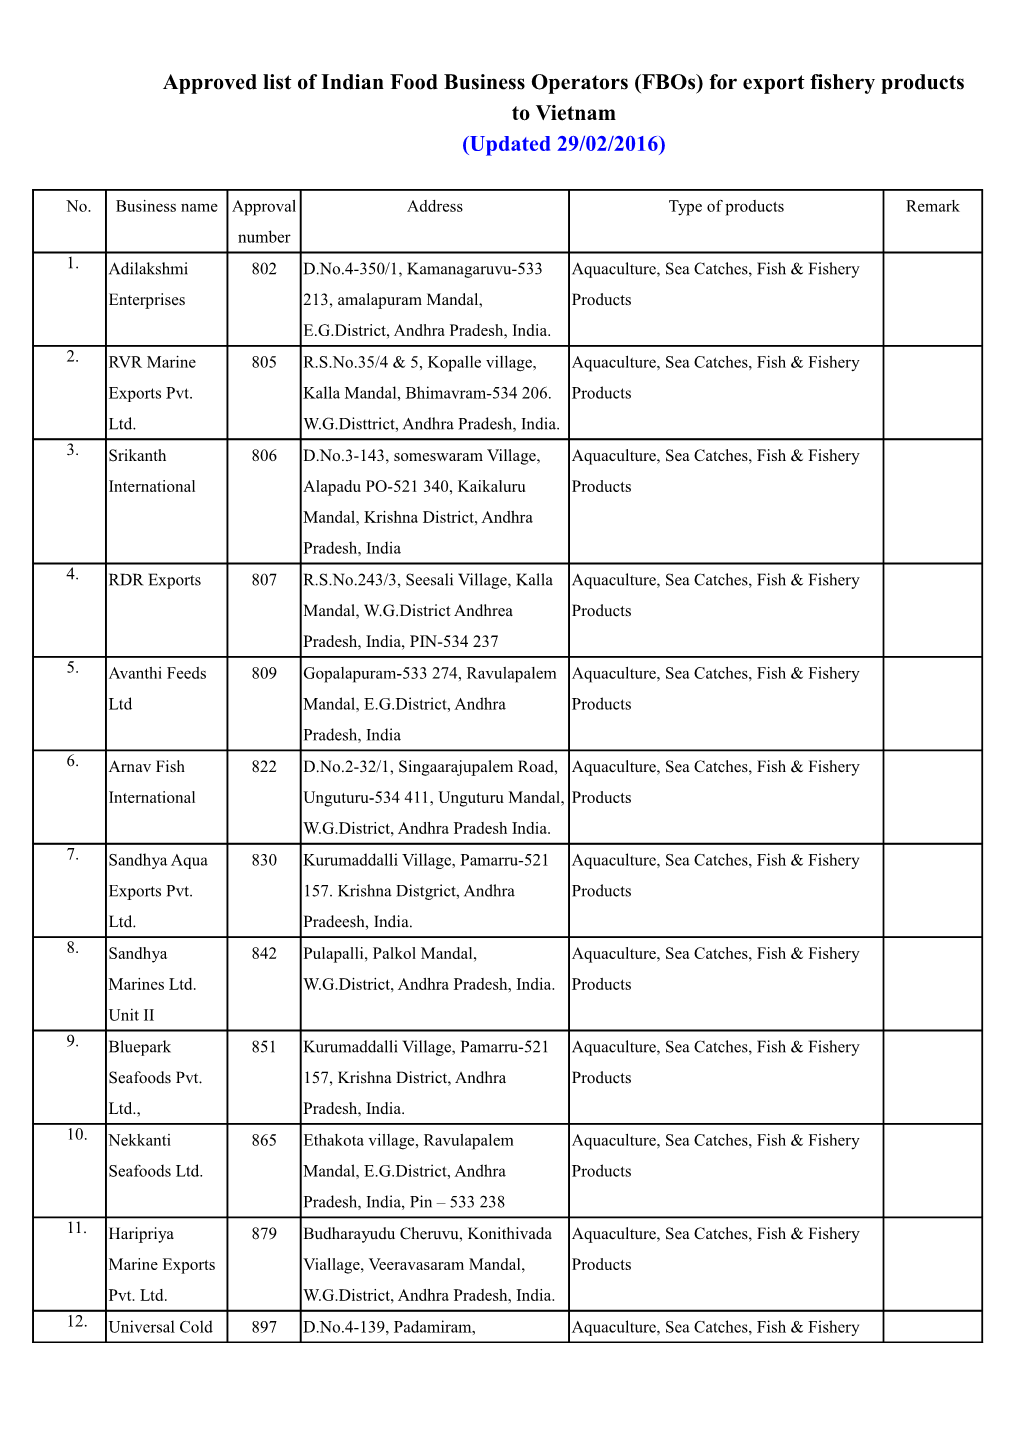 Approved List of Indian Food Business Operators (Fbos)For Export Fishery Products to Vietnam